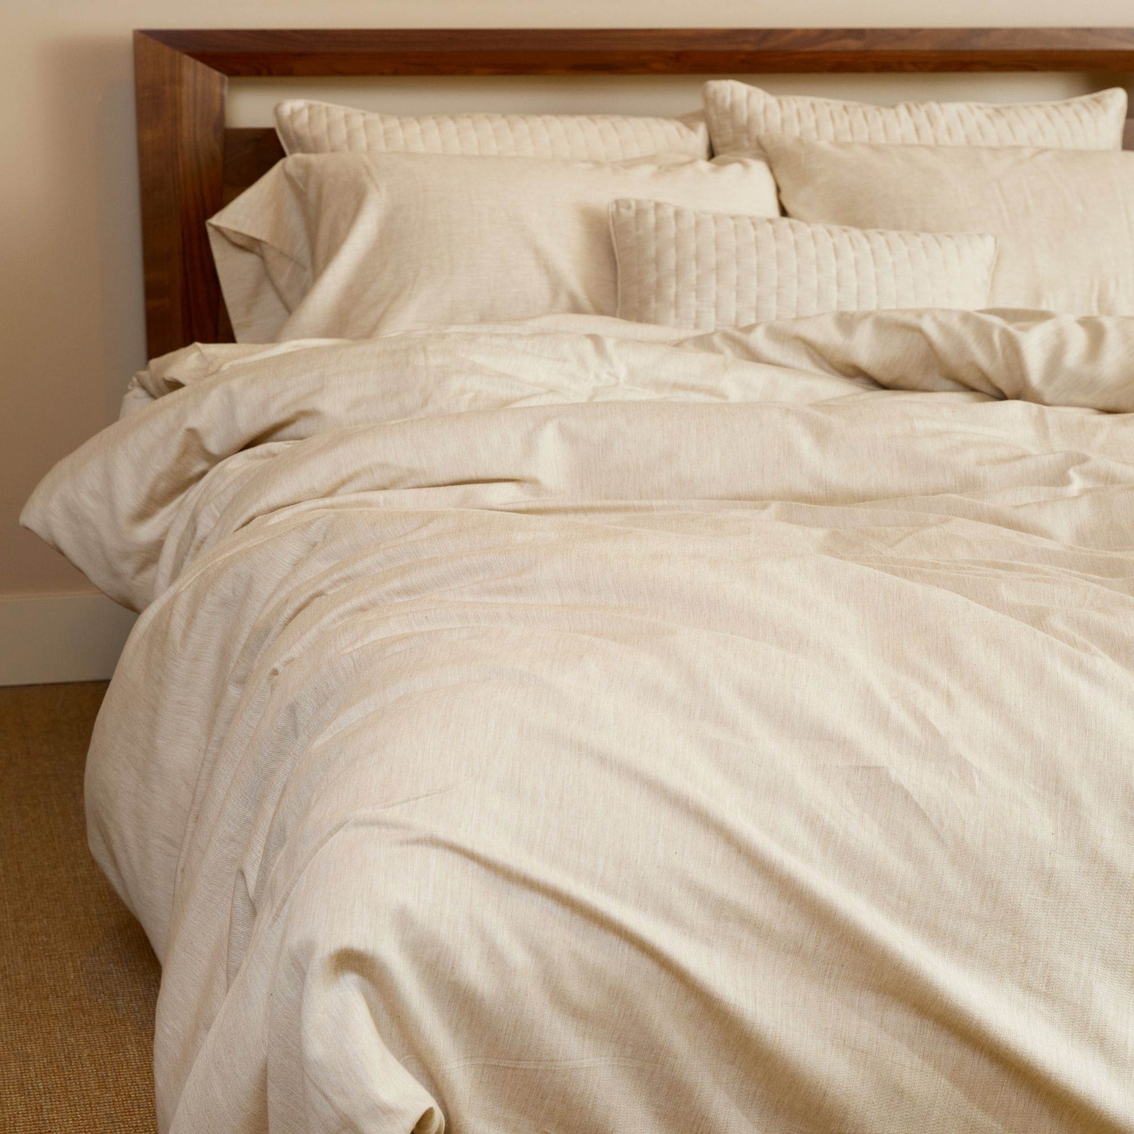 BedVoyage Melange Viscose from Bamboo and Cotton Duvet Cover - Image 4 of 5